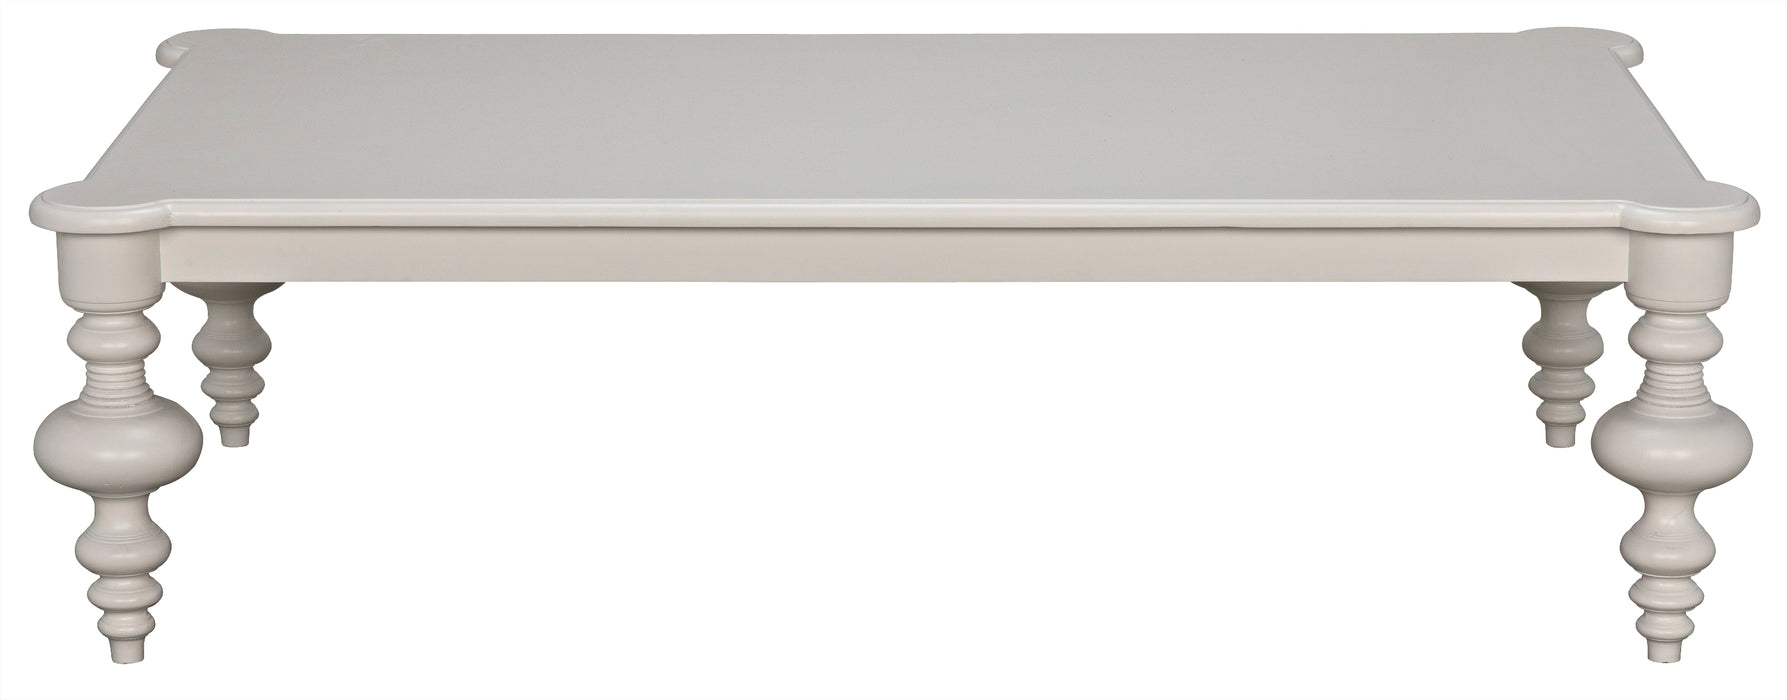 Graff Coffee Table, Solid White